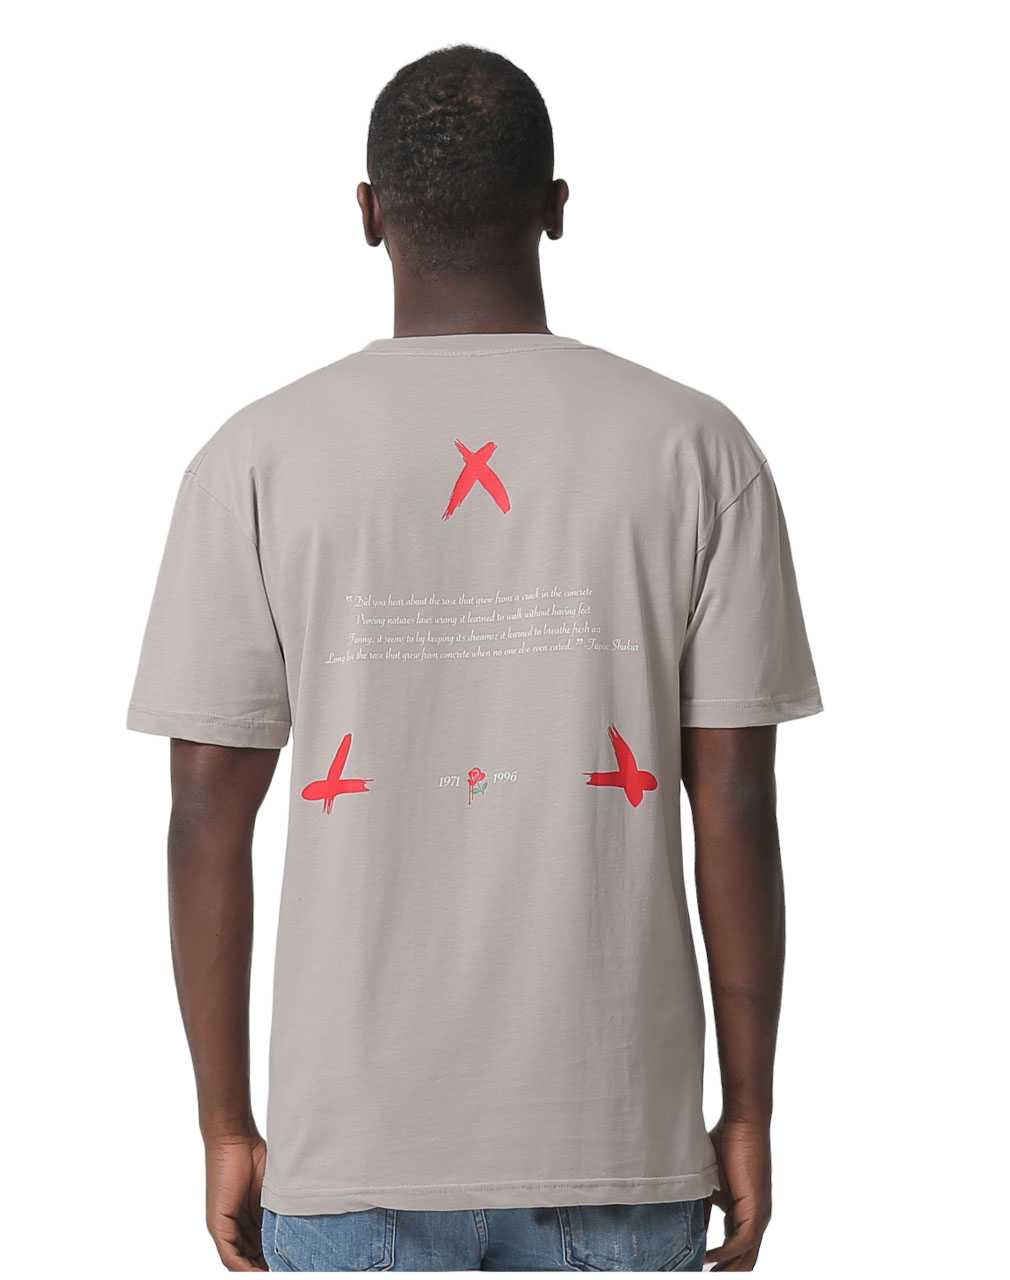 The back of a man's brown T-shirt with red crosses and text related to 2Pac.